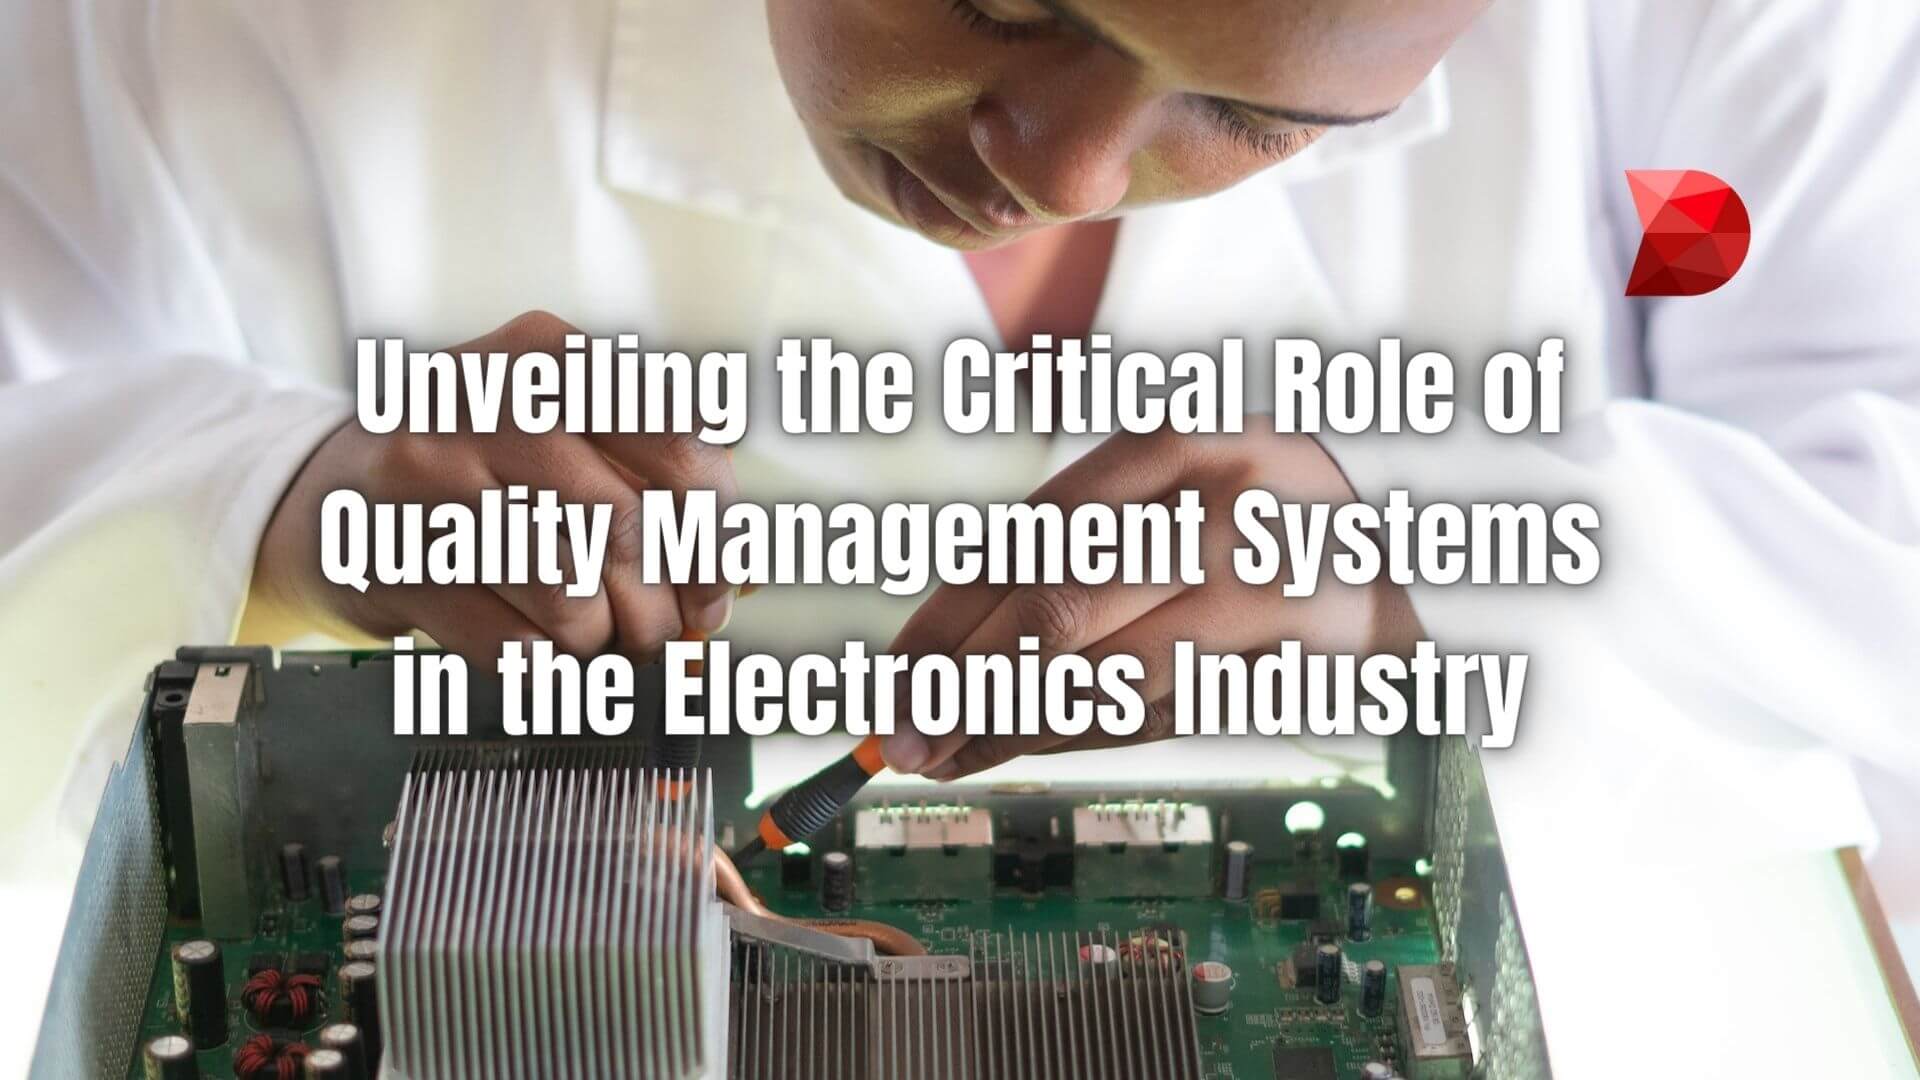 A well-implemented quality management system serves as the backbone of quality control in electronics manufacturing. Click here to learn why!